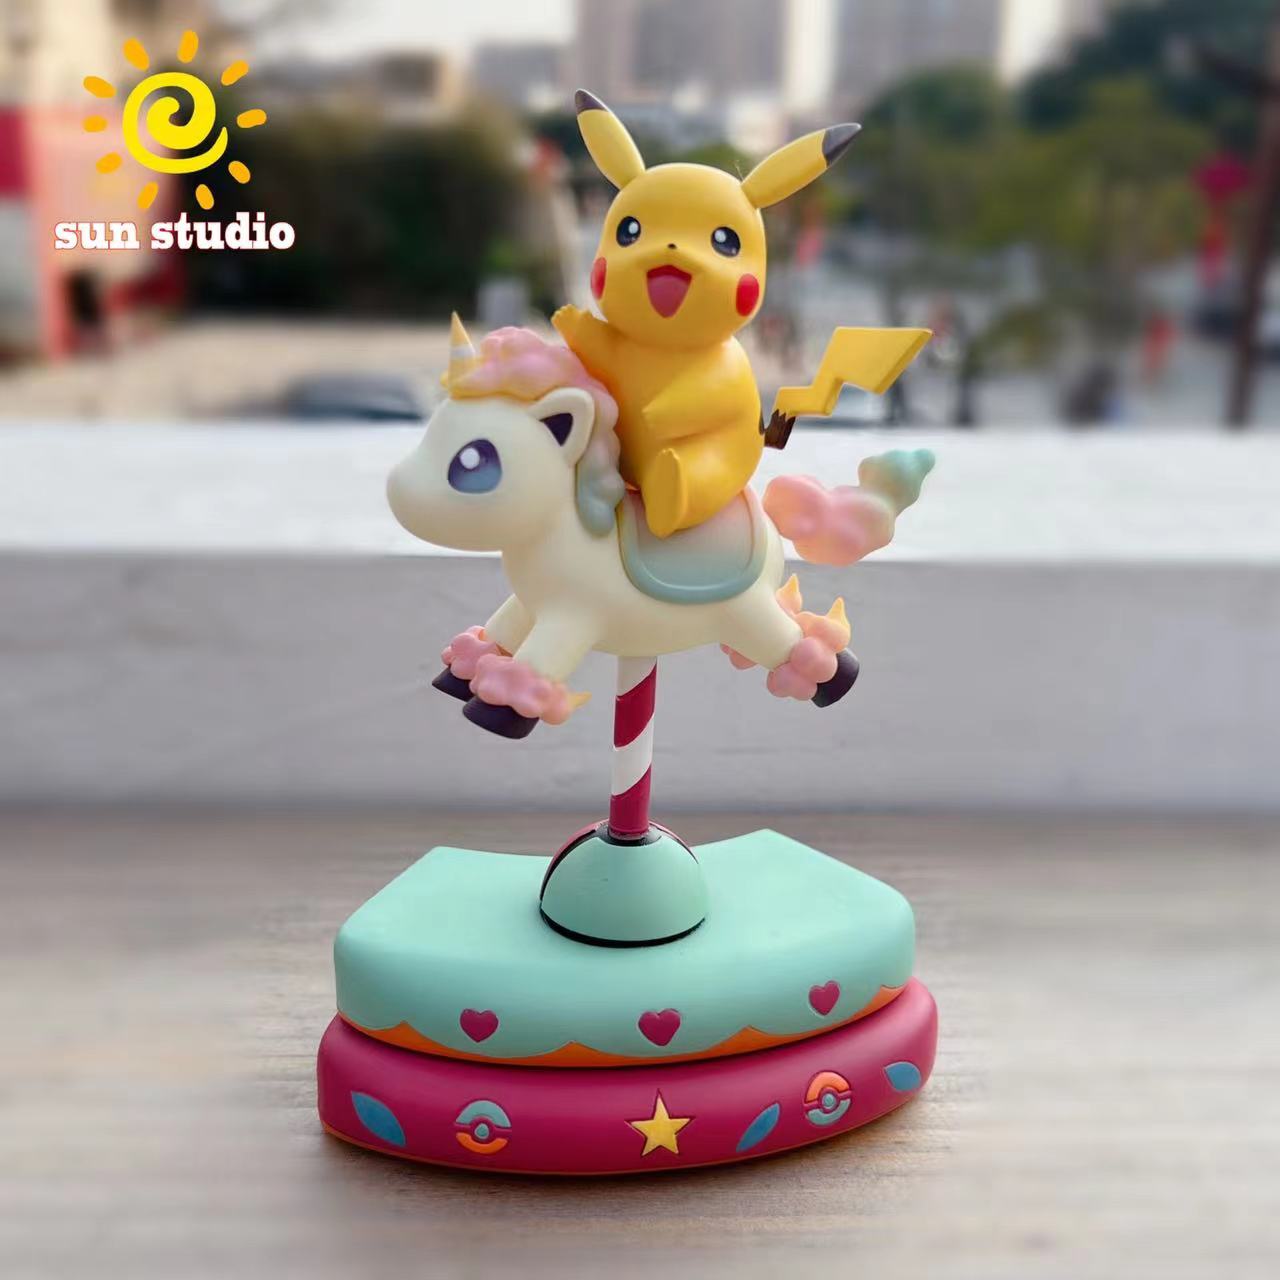 〖Sold Out〗Pokémon Peripheral Products Carousel series 01 Pikachu - SUN Studio